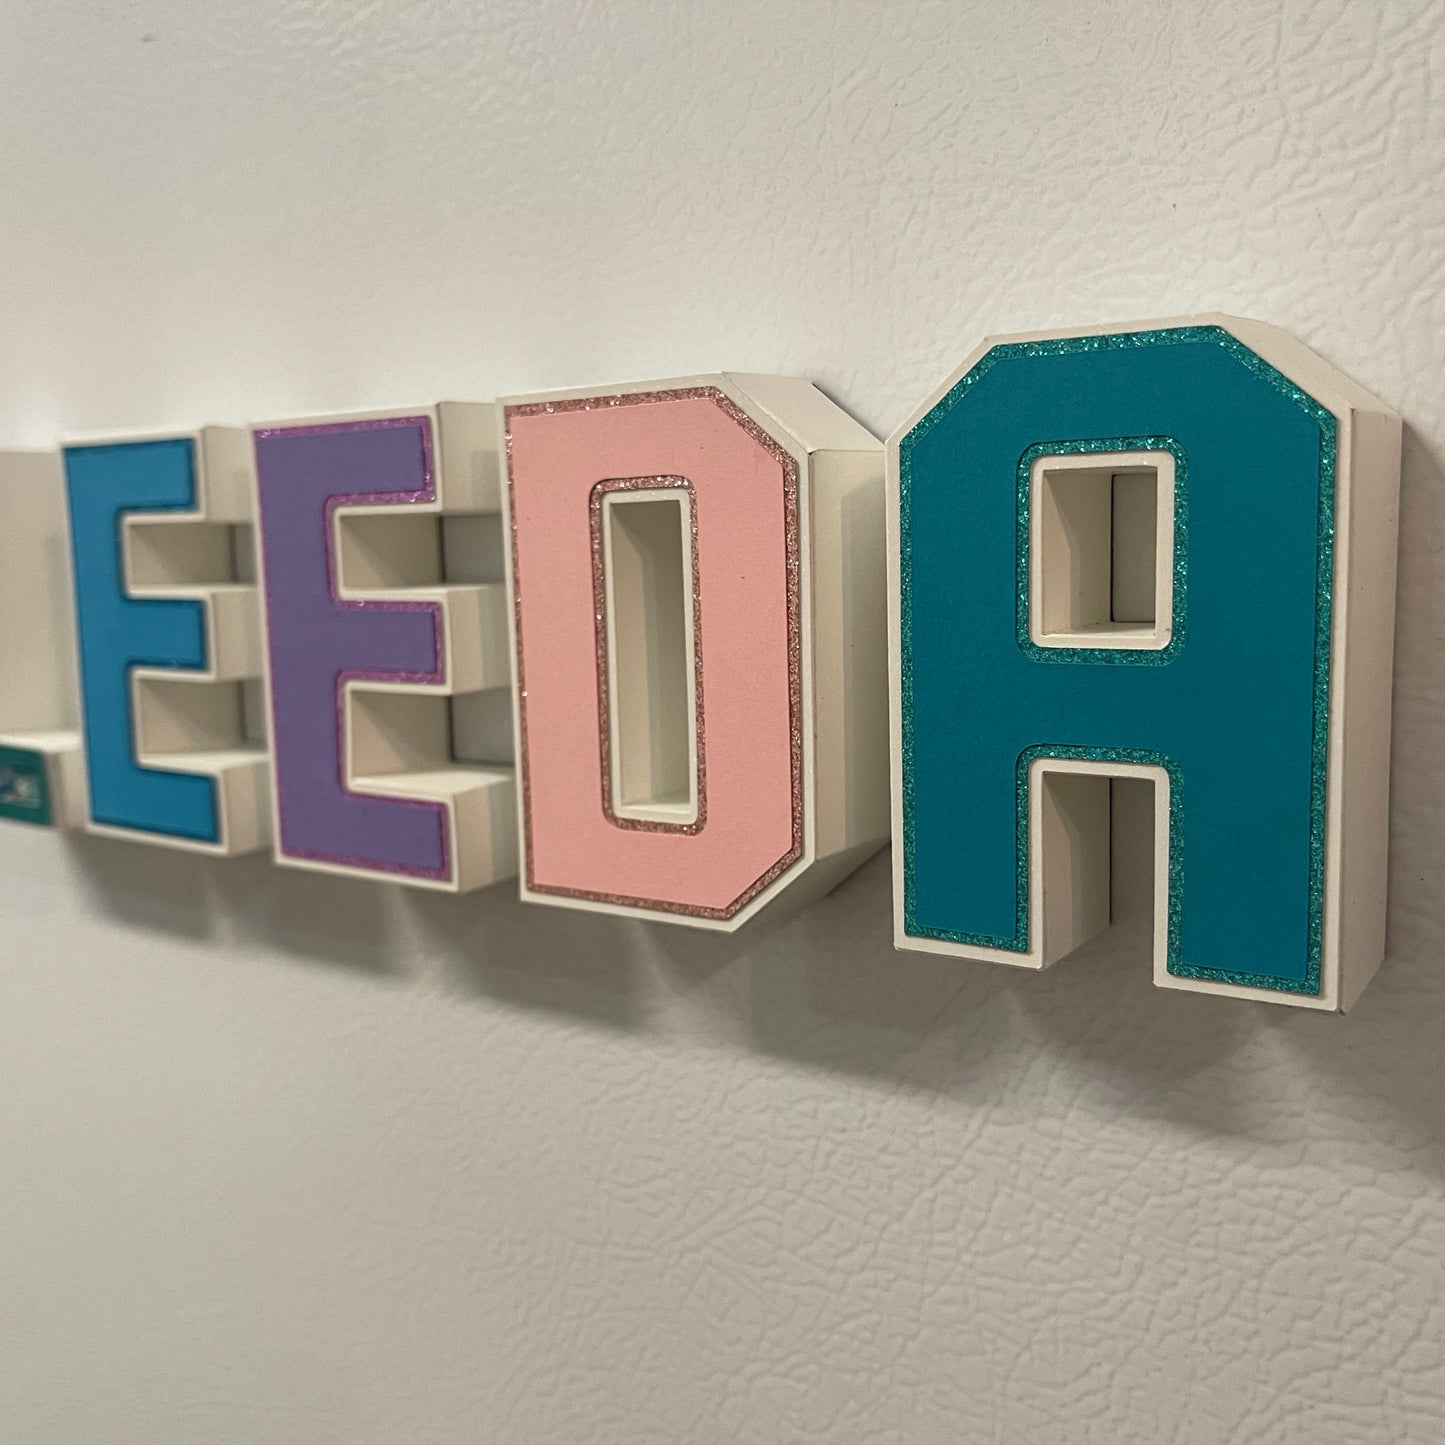 3D Letter Magnet- 3 inches